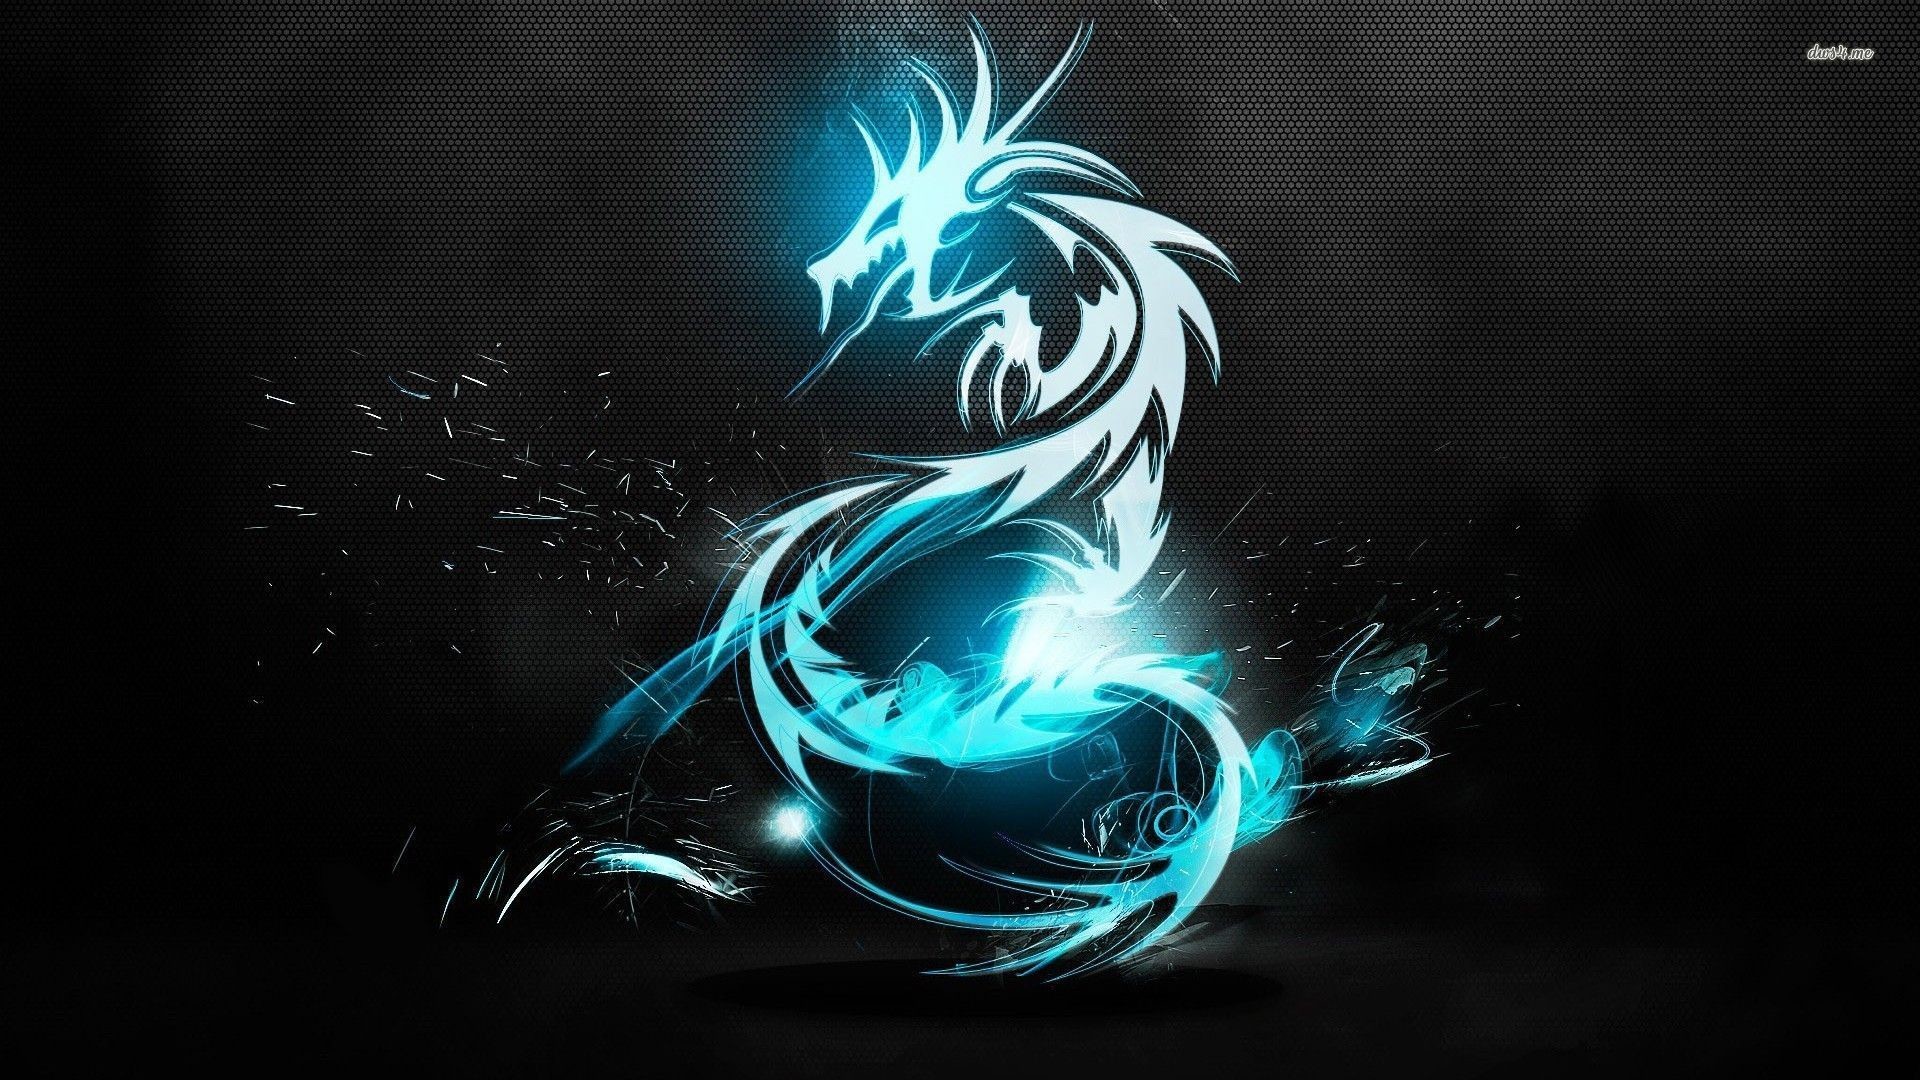 Top Tribal Dragon Wallpapers Hd Images for Pinterest